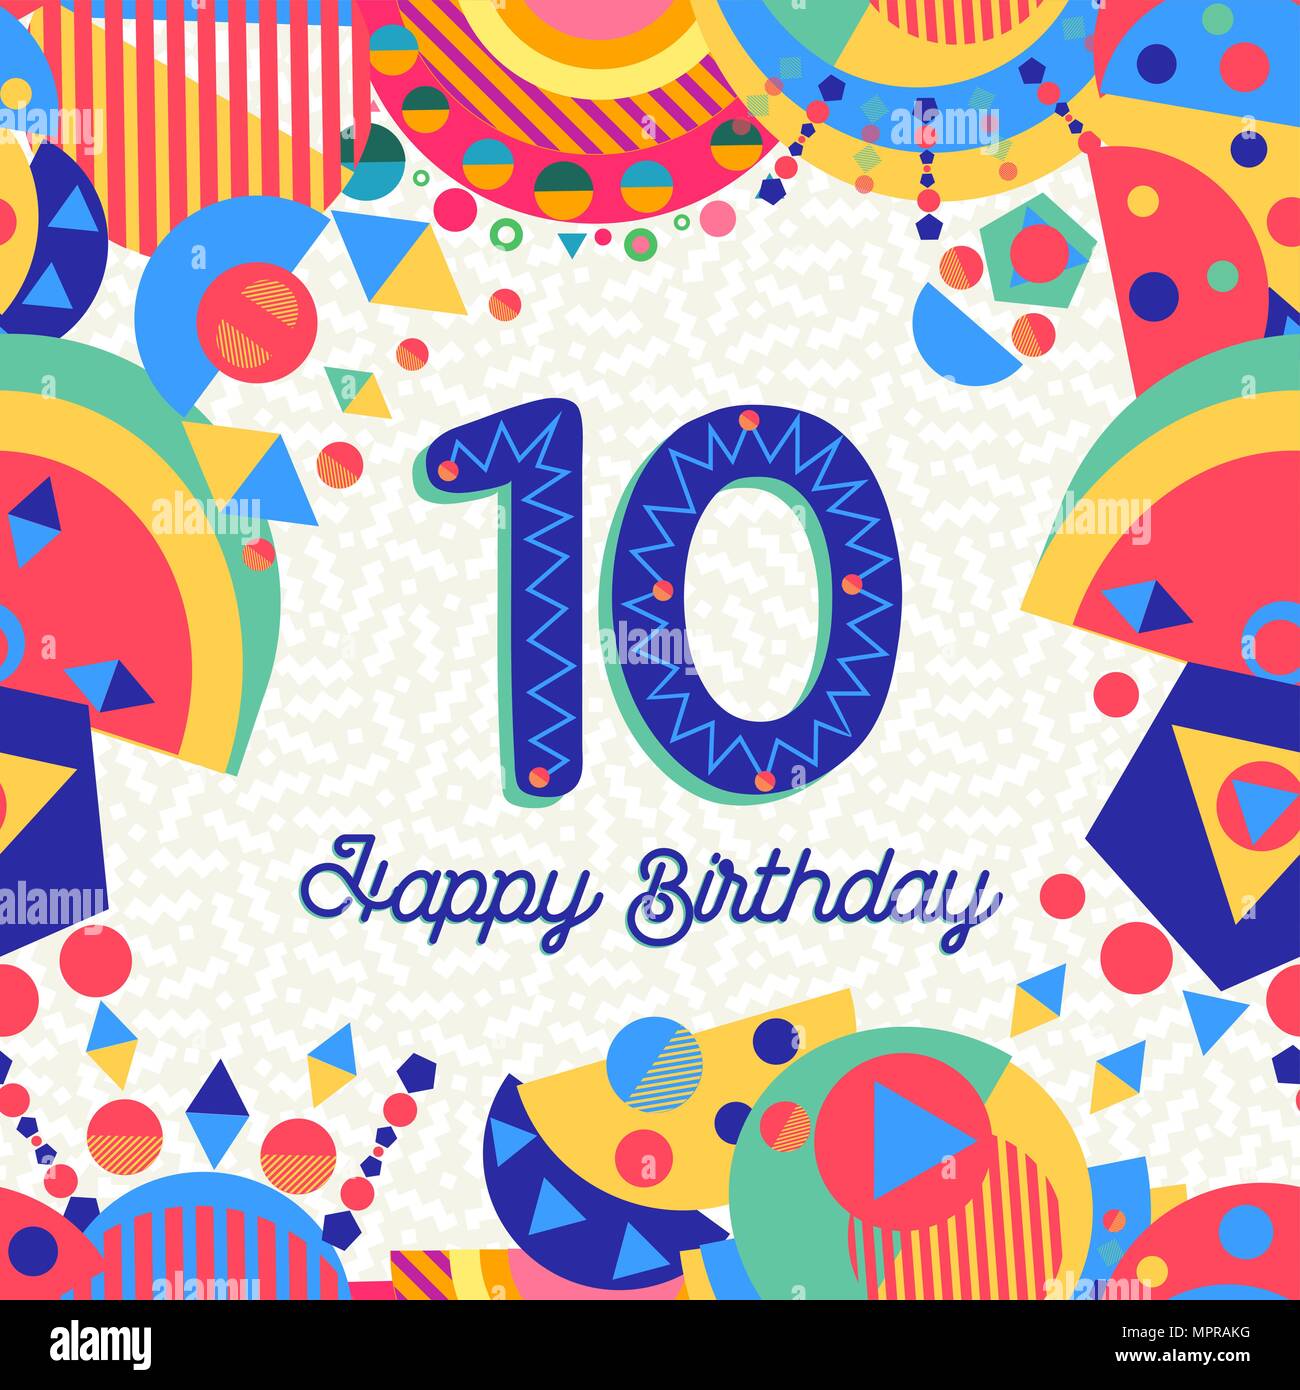 Happy Birthday ten 10 year fun design with number, text label and colorful decoration. Ideal for party invitation or greeting card. EPS10 vector. Stock Vector